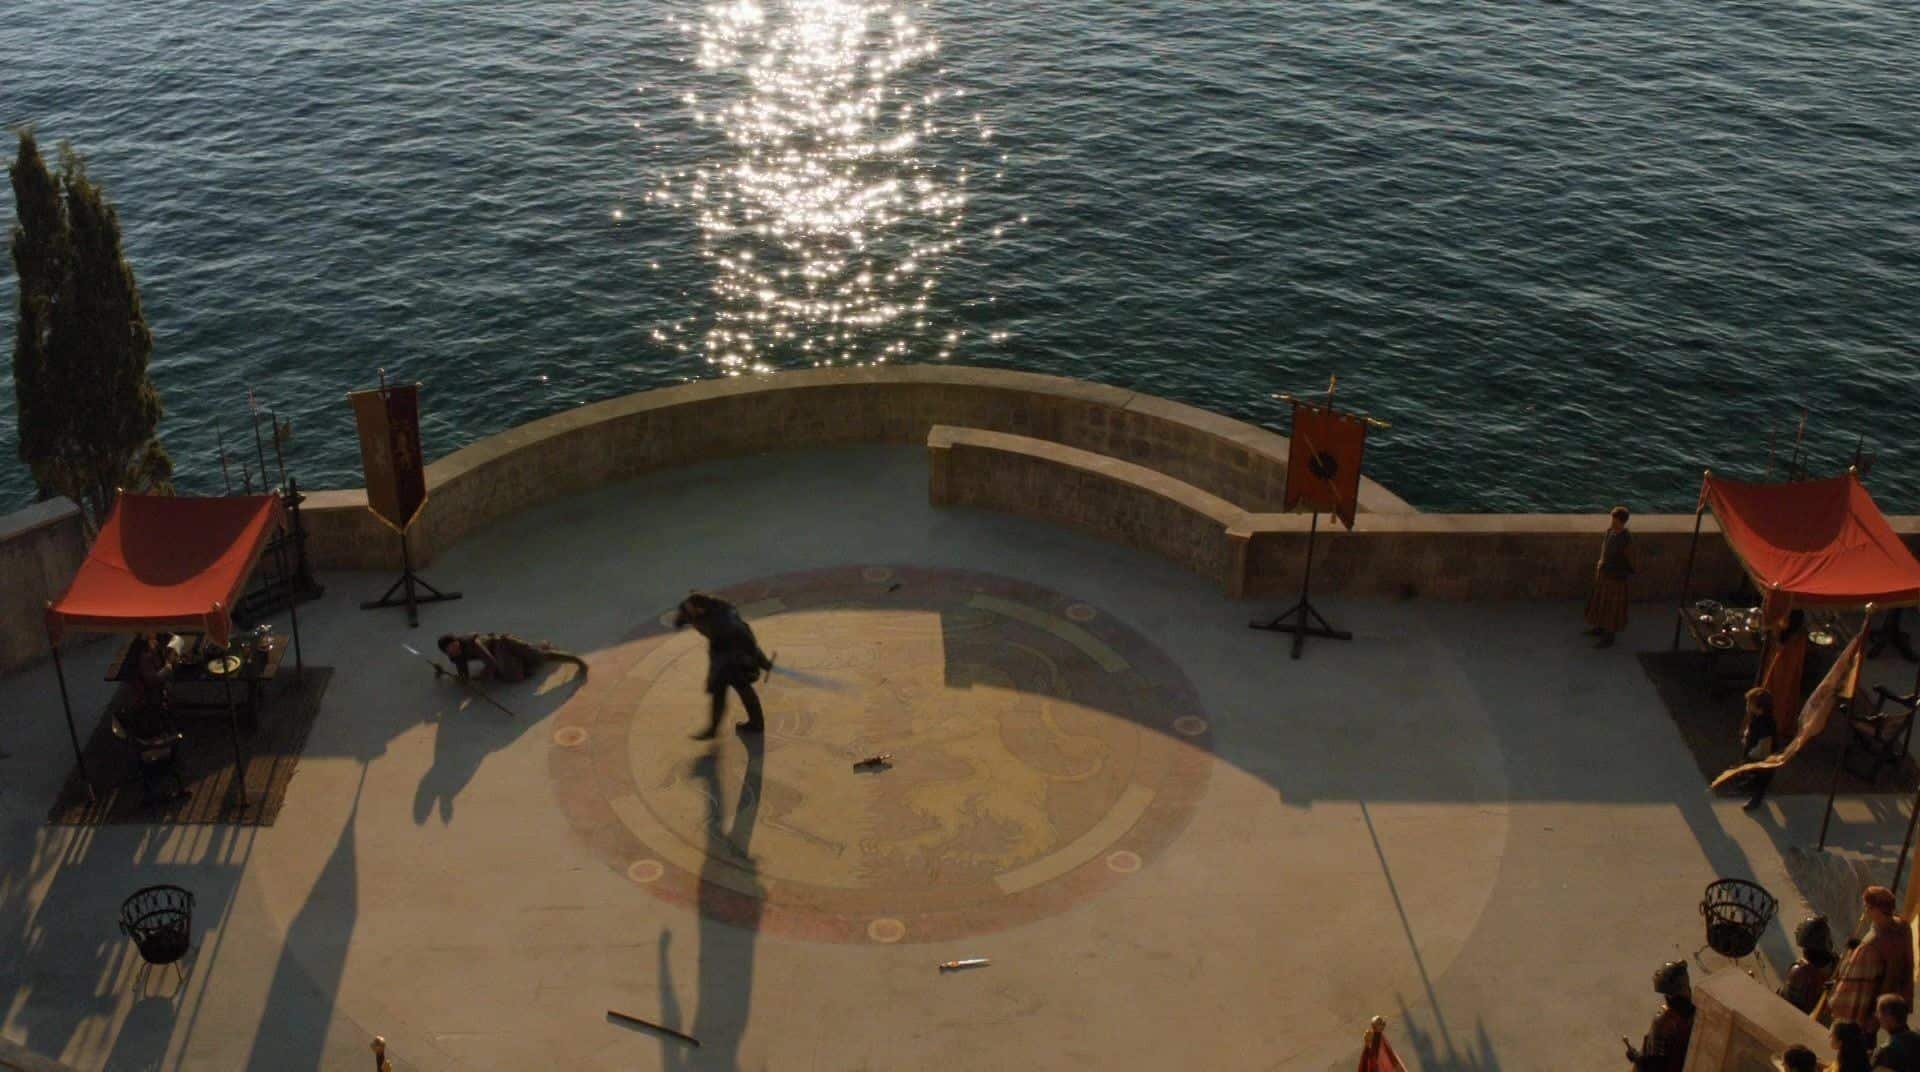 Game Of Thrones Croatia: Locations And Tours - S4 E8 Belvedere Hotel Atrium - Fight Between Prince Oberyn & The Mountain